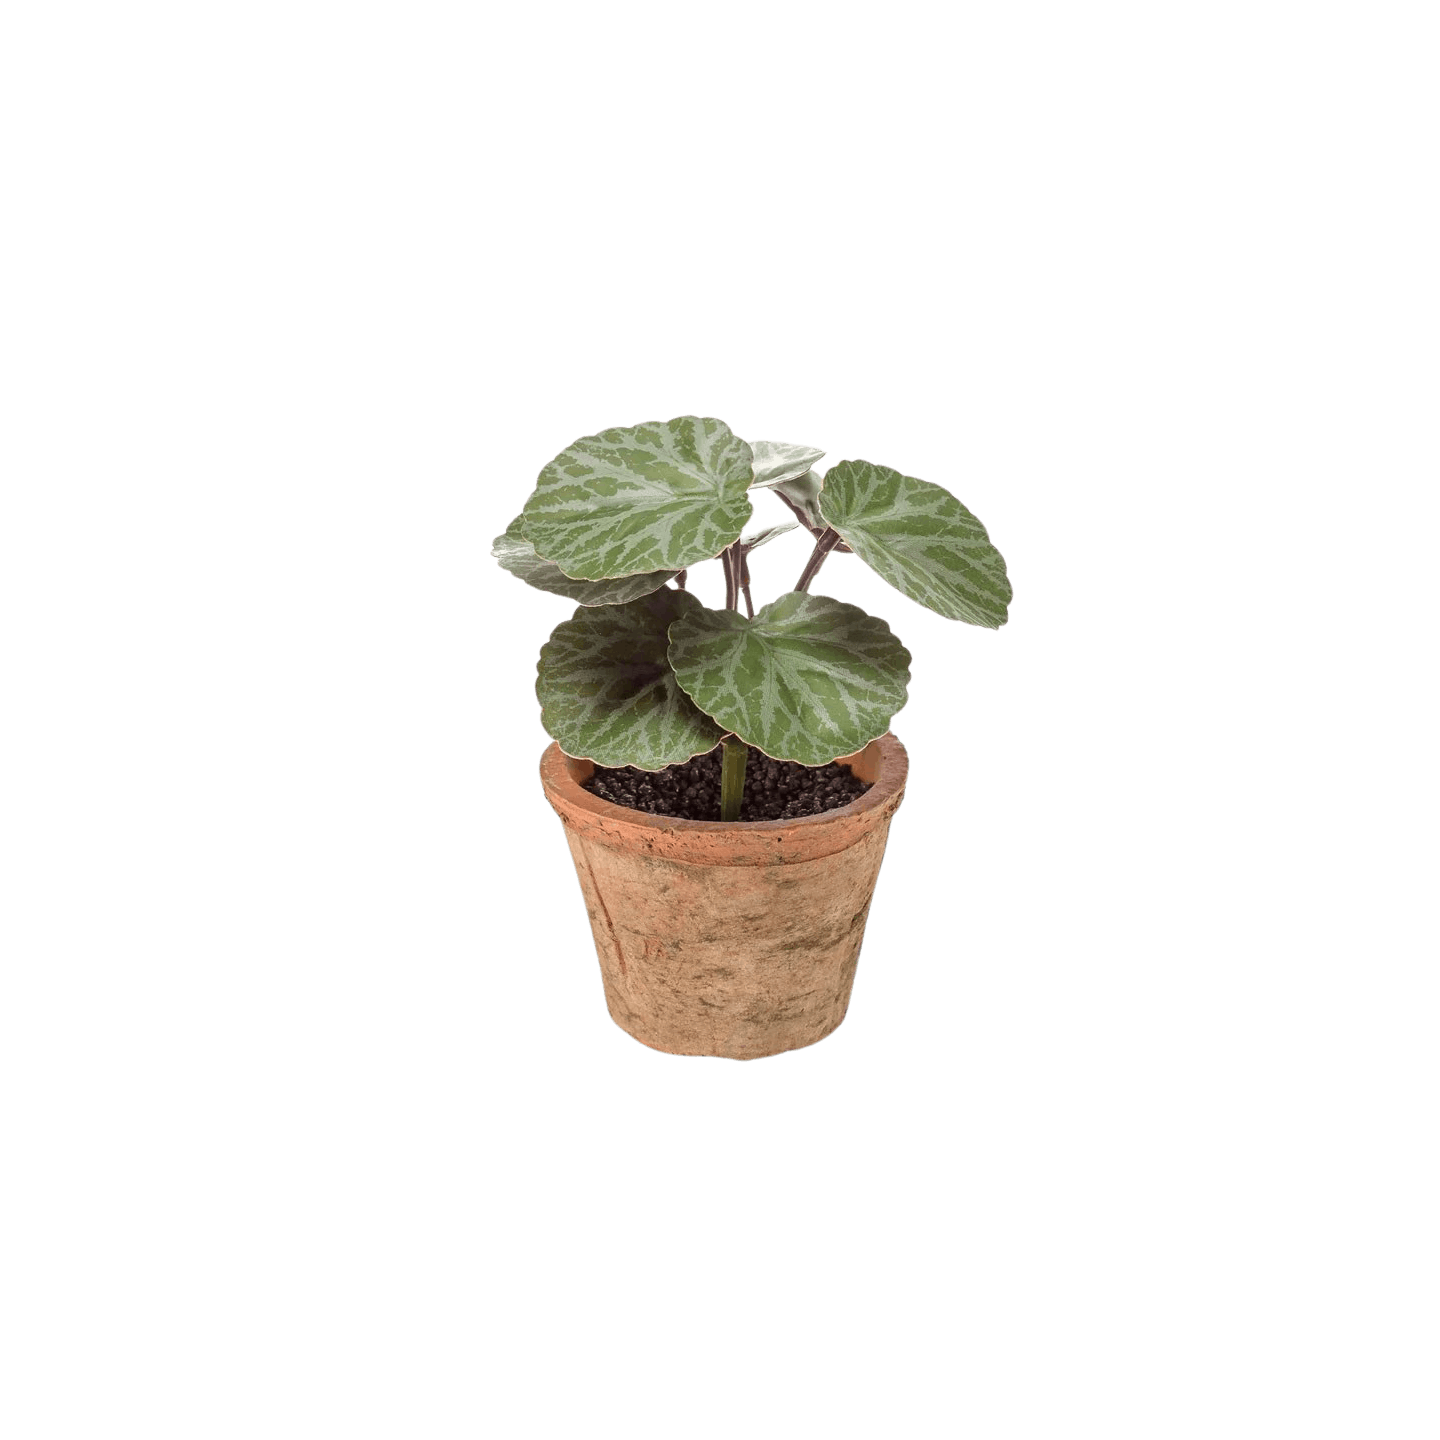 Small artificial saxifrage plant in rustic terra pot